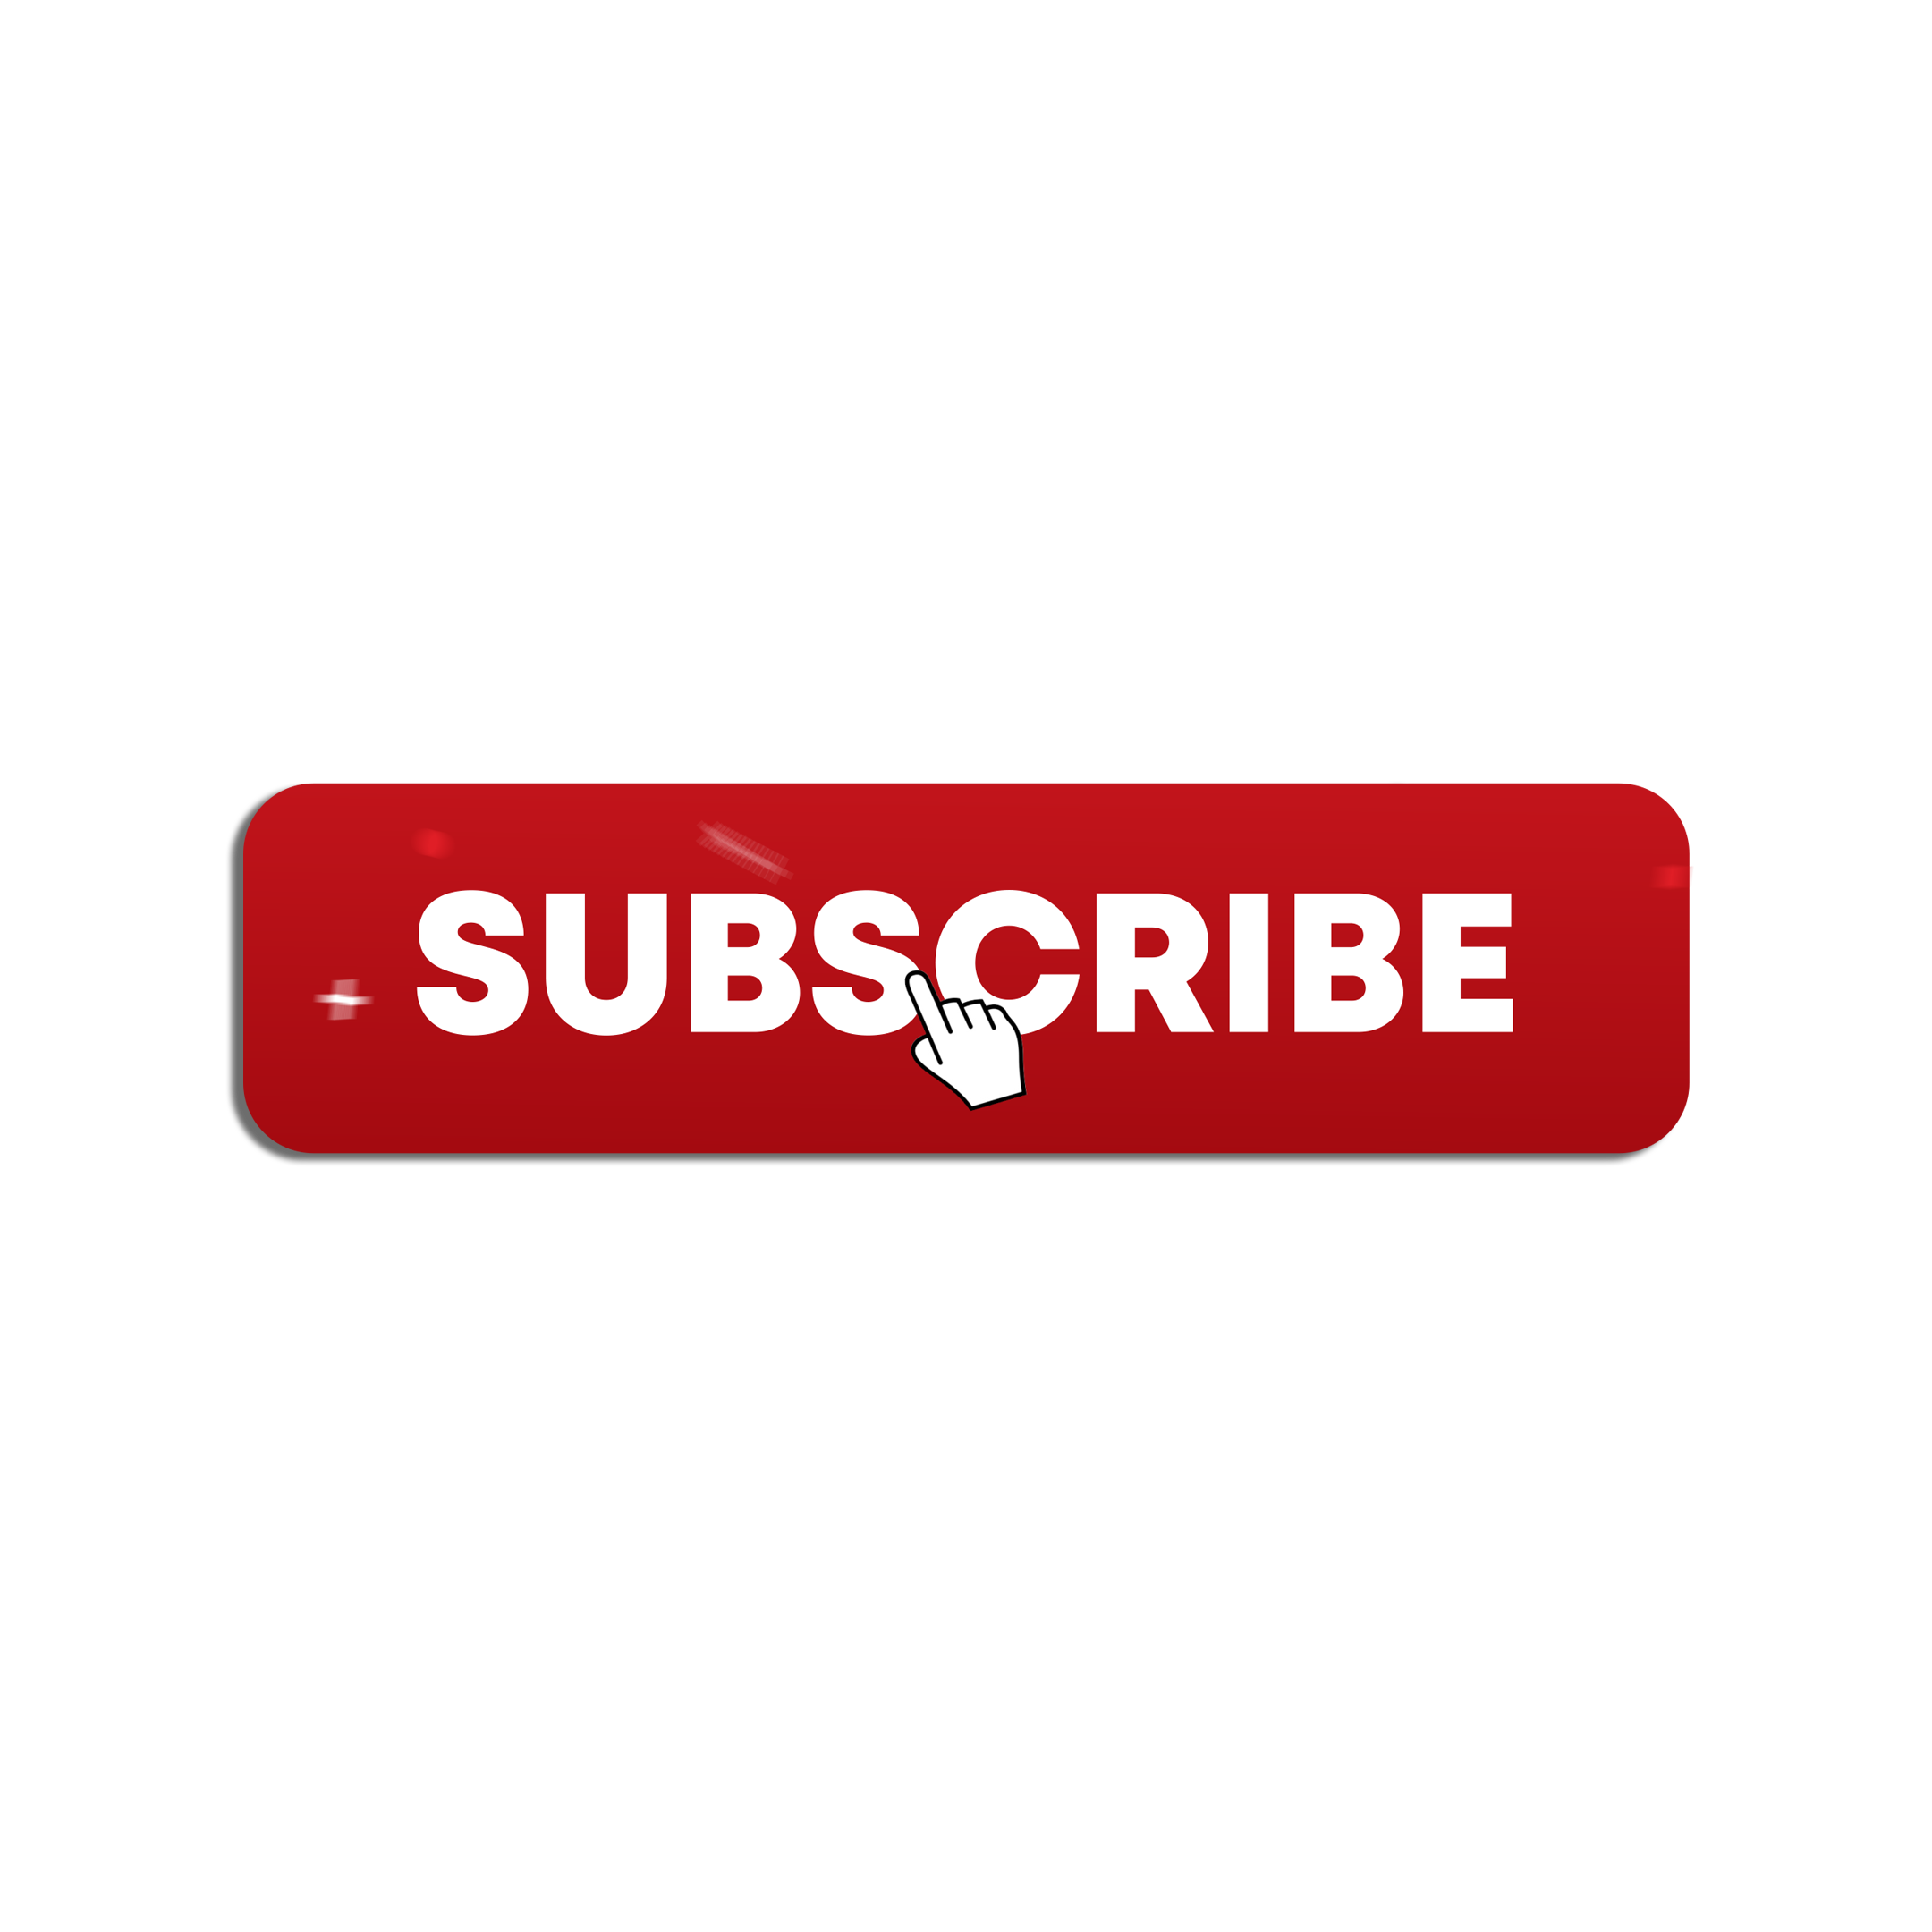 Single YouTube subscribe button png image download - MTC TUTORIALS